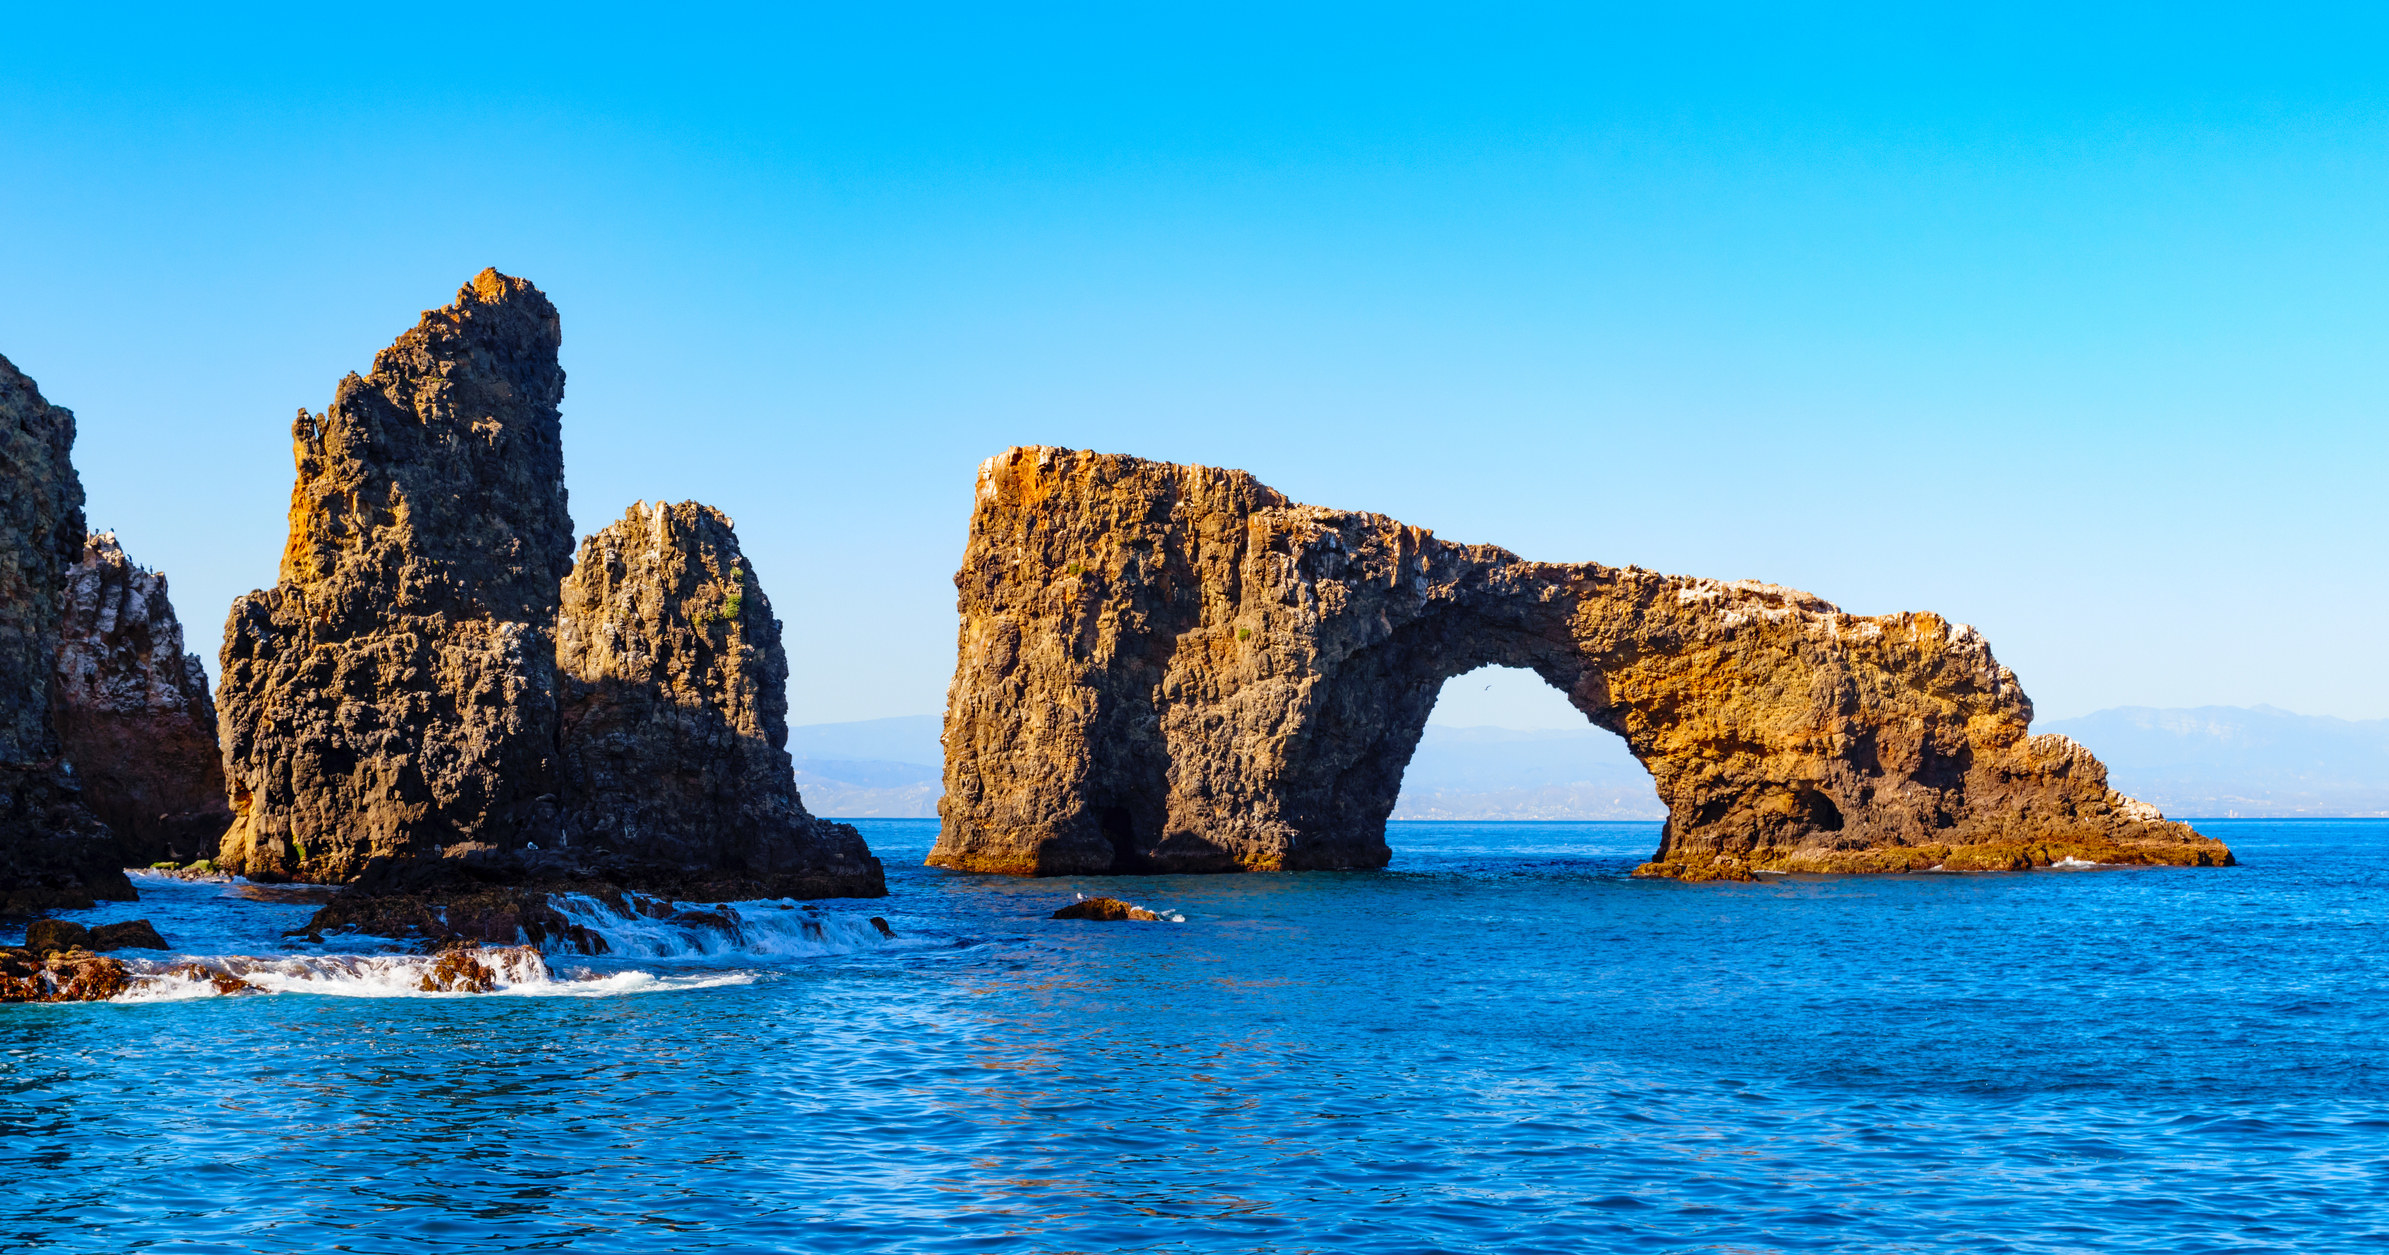 Photo of Arch Rock a natural bridge and arch rock formation at Anacapa Island, part of the Channel Islands National Park near Los Angeles in California, USA.